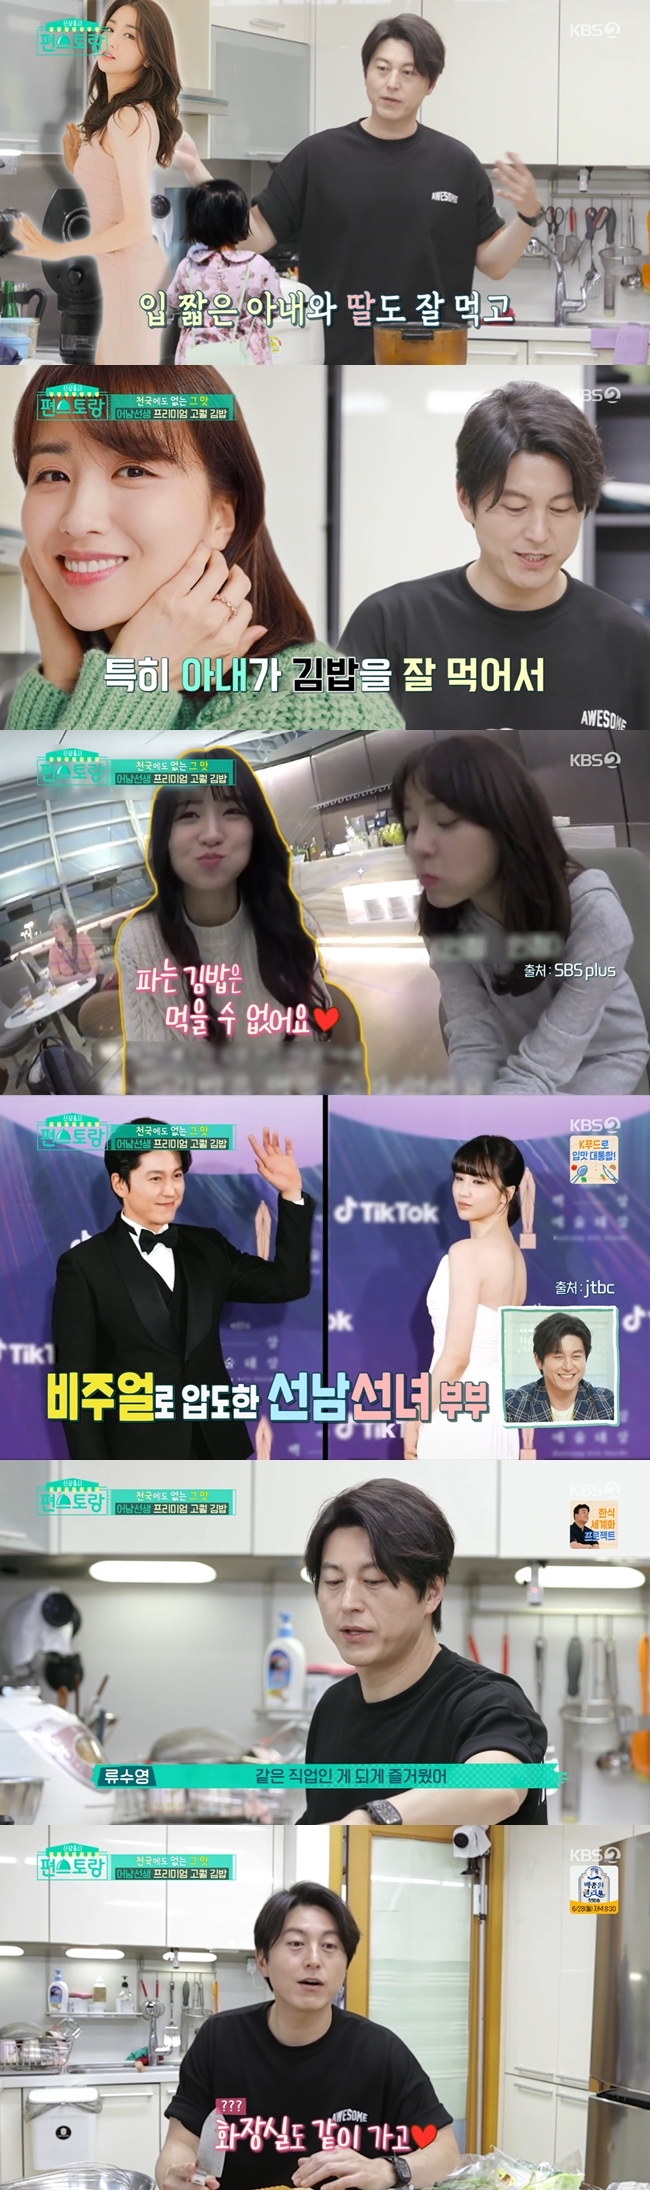 Actor Ryu Soo-young has revealed his sweet affection for his wife Park Ha-sun.On June 25, KBS 2TV entertainment program Stars Top Recipe at Fun-Staurant was depicted as Ryu Soo-young, who made Gimbap for the production team and recalled his family.Im hungry, Ill make you a gimbap, Ryu Soo-young told the crew.We always have gimbap ingredients so that we can rice immediately when family requests come in, he said.My wife does not eat a lot of rice, but my child has a short mouth, and Gimbap eats a lot. Mrs. Park likes Gimbap so much, and when she goes abroad, she seems to have wrapped Gimbap almost every time.In fact, Park Ha-sun introduced Gimbap, which was cheap by Ryu Soo-young in a past broadcast, and said, Gimbap can not be eaten.Ryu Soo-young turned on the radio that Park Ha-sun was conducting before he packed Gimbap in earnest and talked with the production team in various ways.I went to Baeksang Arts Grand Prize a while ago and I liked it so much that it was the same job. Restroom went with me.So I went to my wife and went to the retroom, so I went with her and talked. I was so beautiful that I was just taking pictures. I usually set up the lights and take pictures myself, he said, showing off his affection with Park Ha-sun.